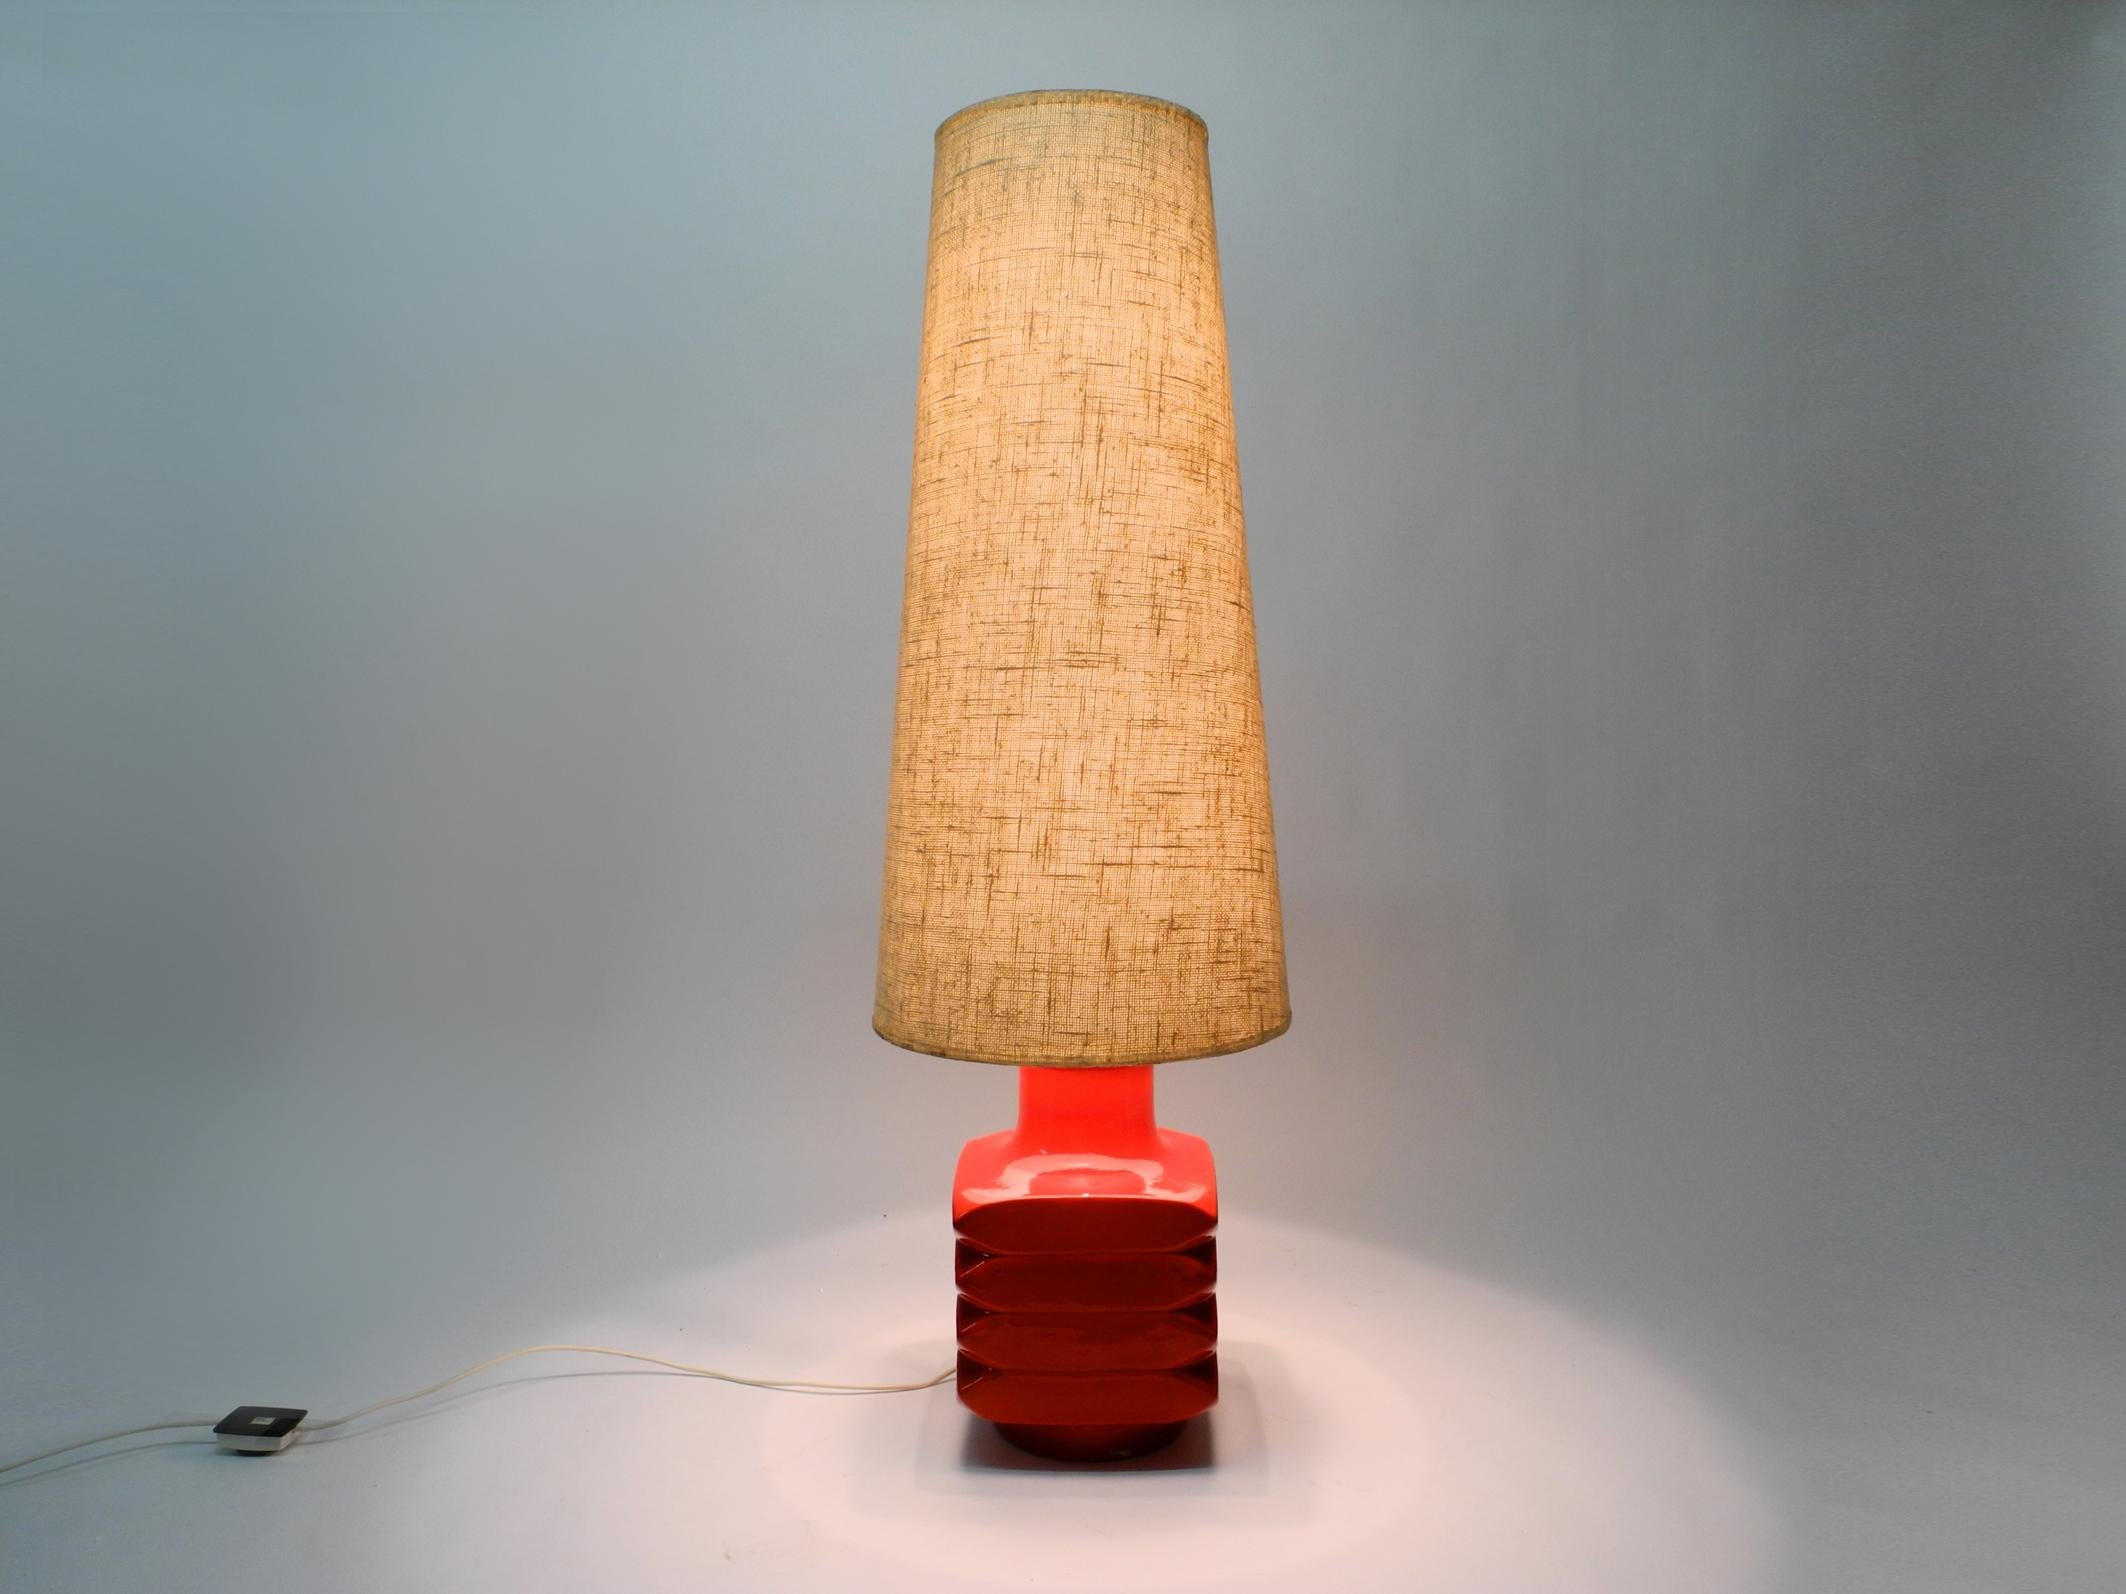 Beautiful 1960s large red Space Age ceramic floor lamp with a huge original beige fabric shade. Typical 1960s design. Solid and high-quality manufactured.
No damage to the entire lamp. No cracks or chips on the ceramic. Still has the bright red